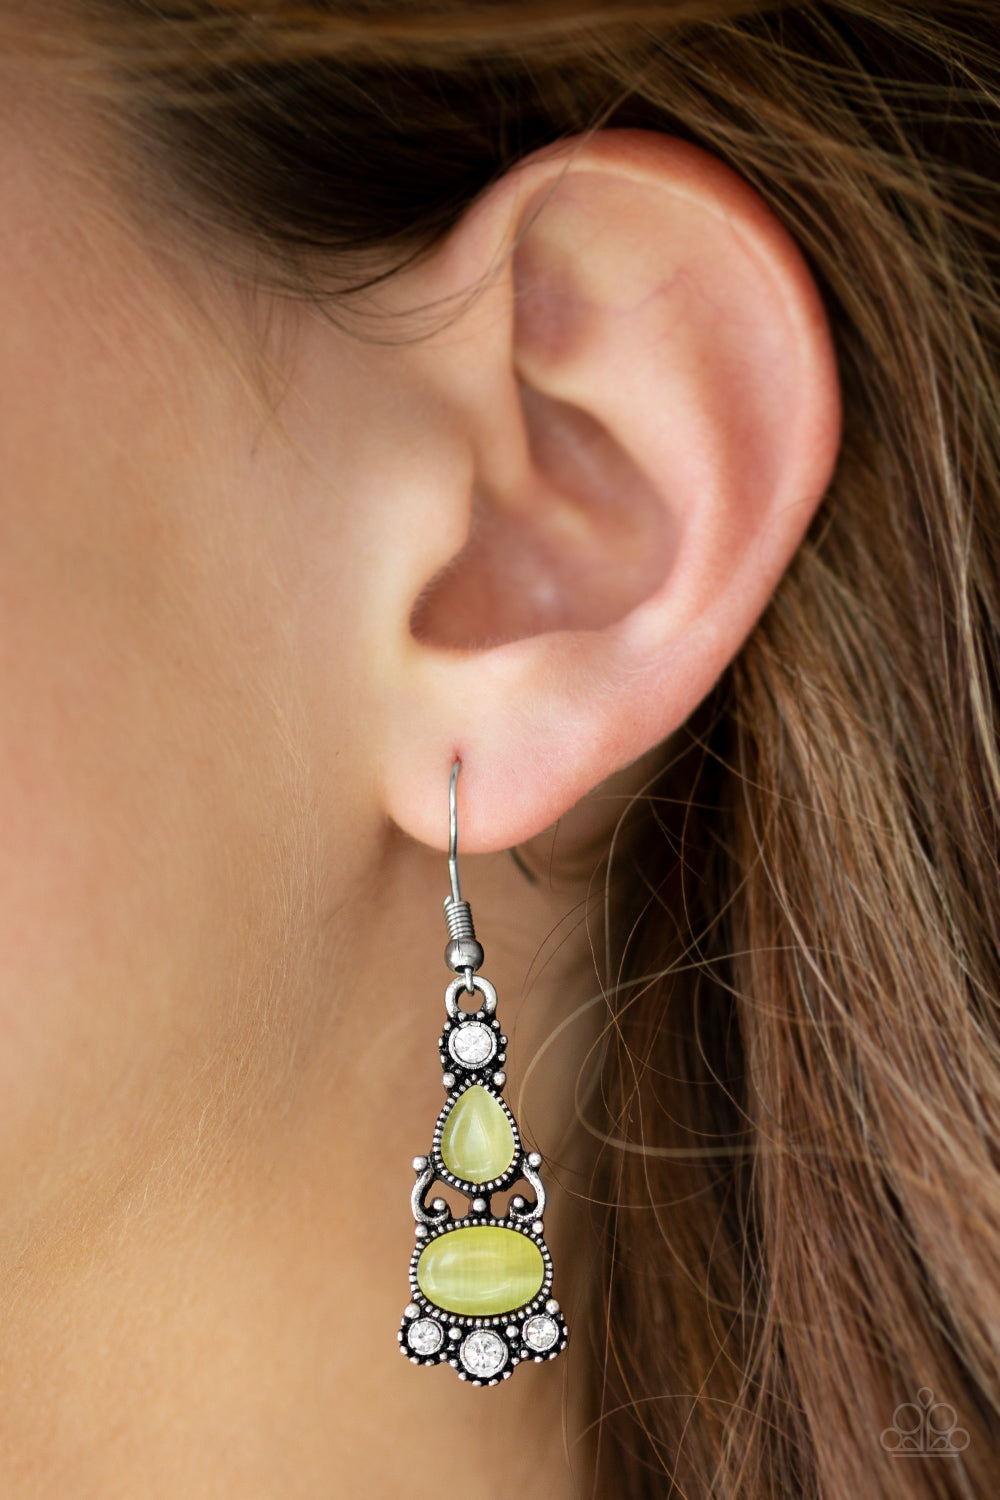 Paparazzi Push Your LUXE - Yellow Moonstone - White Rhinestones Silver Earrings - $5 Jewelry With Ashley Swint